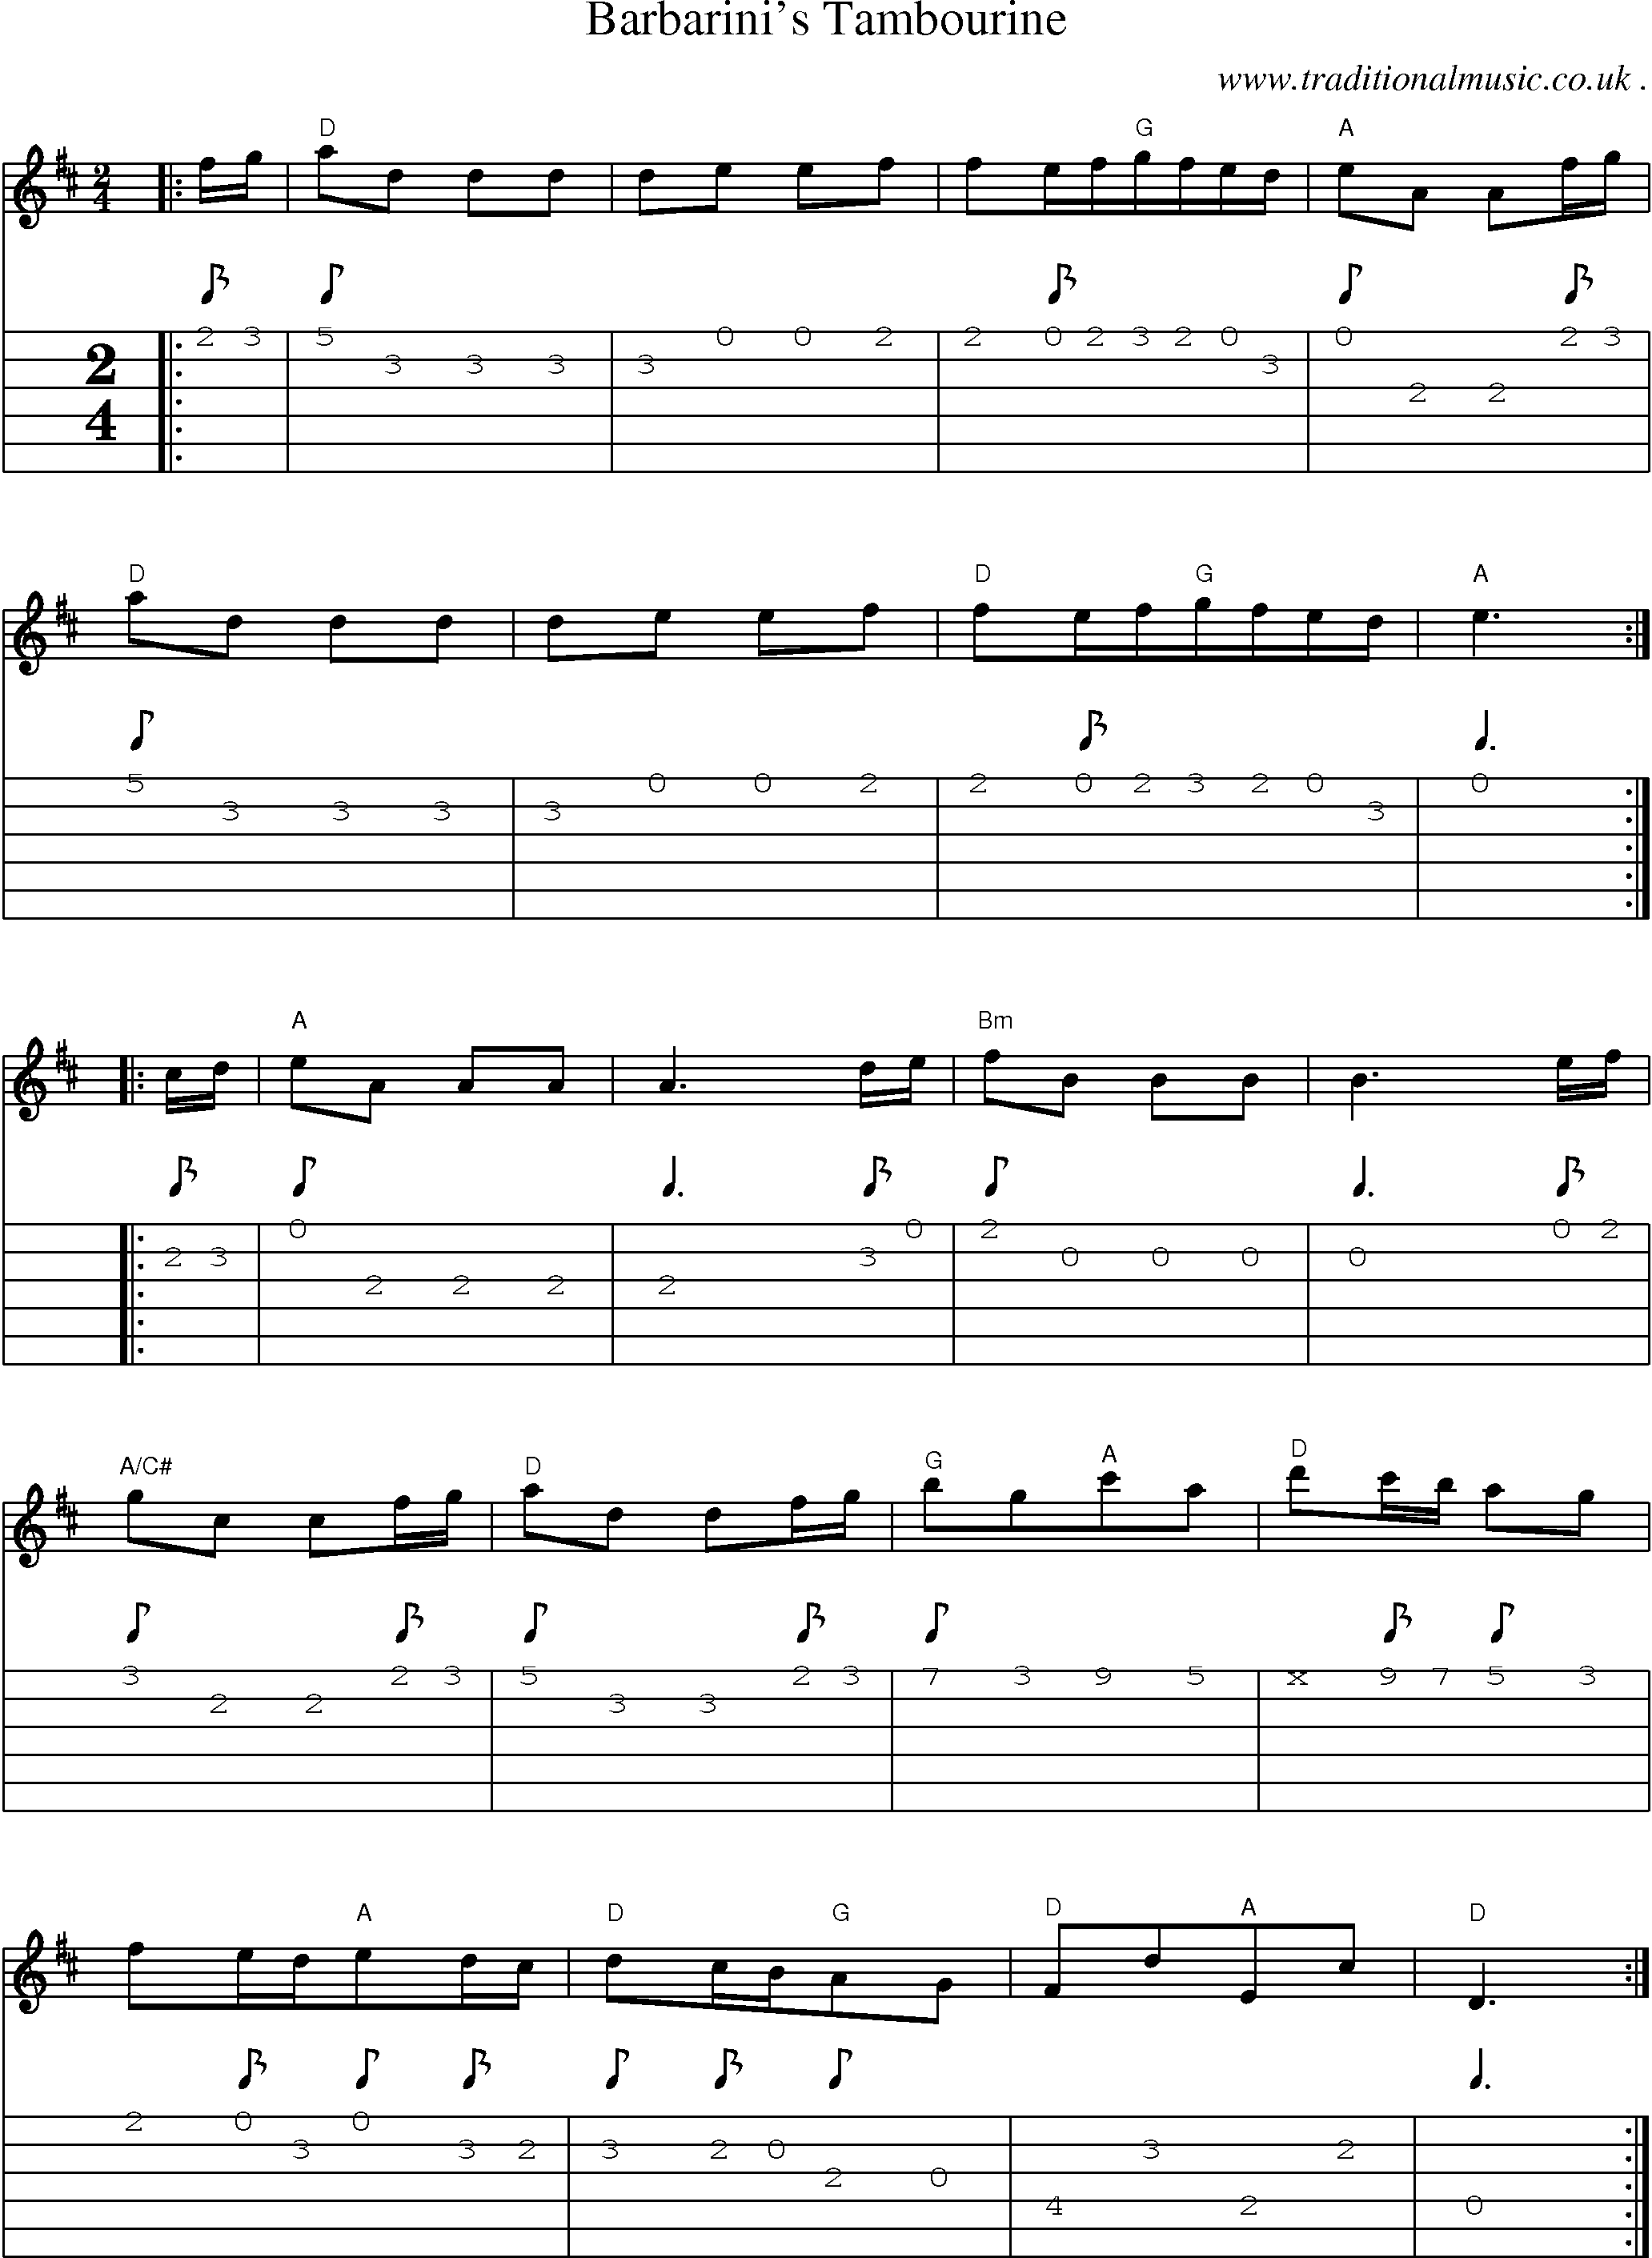 Sheet-Music and Guitar Tabs for Barbarinis Tambourine